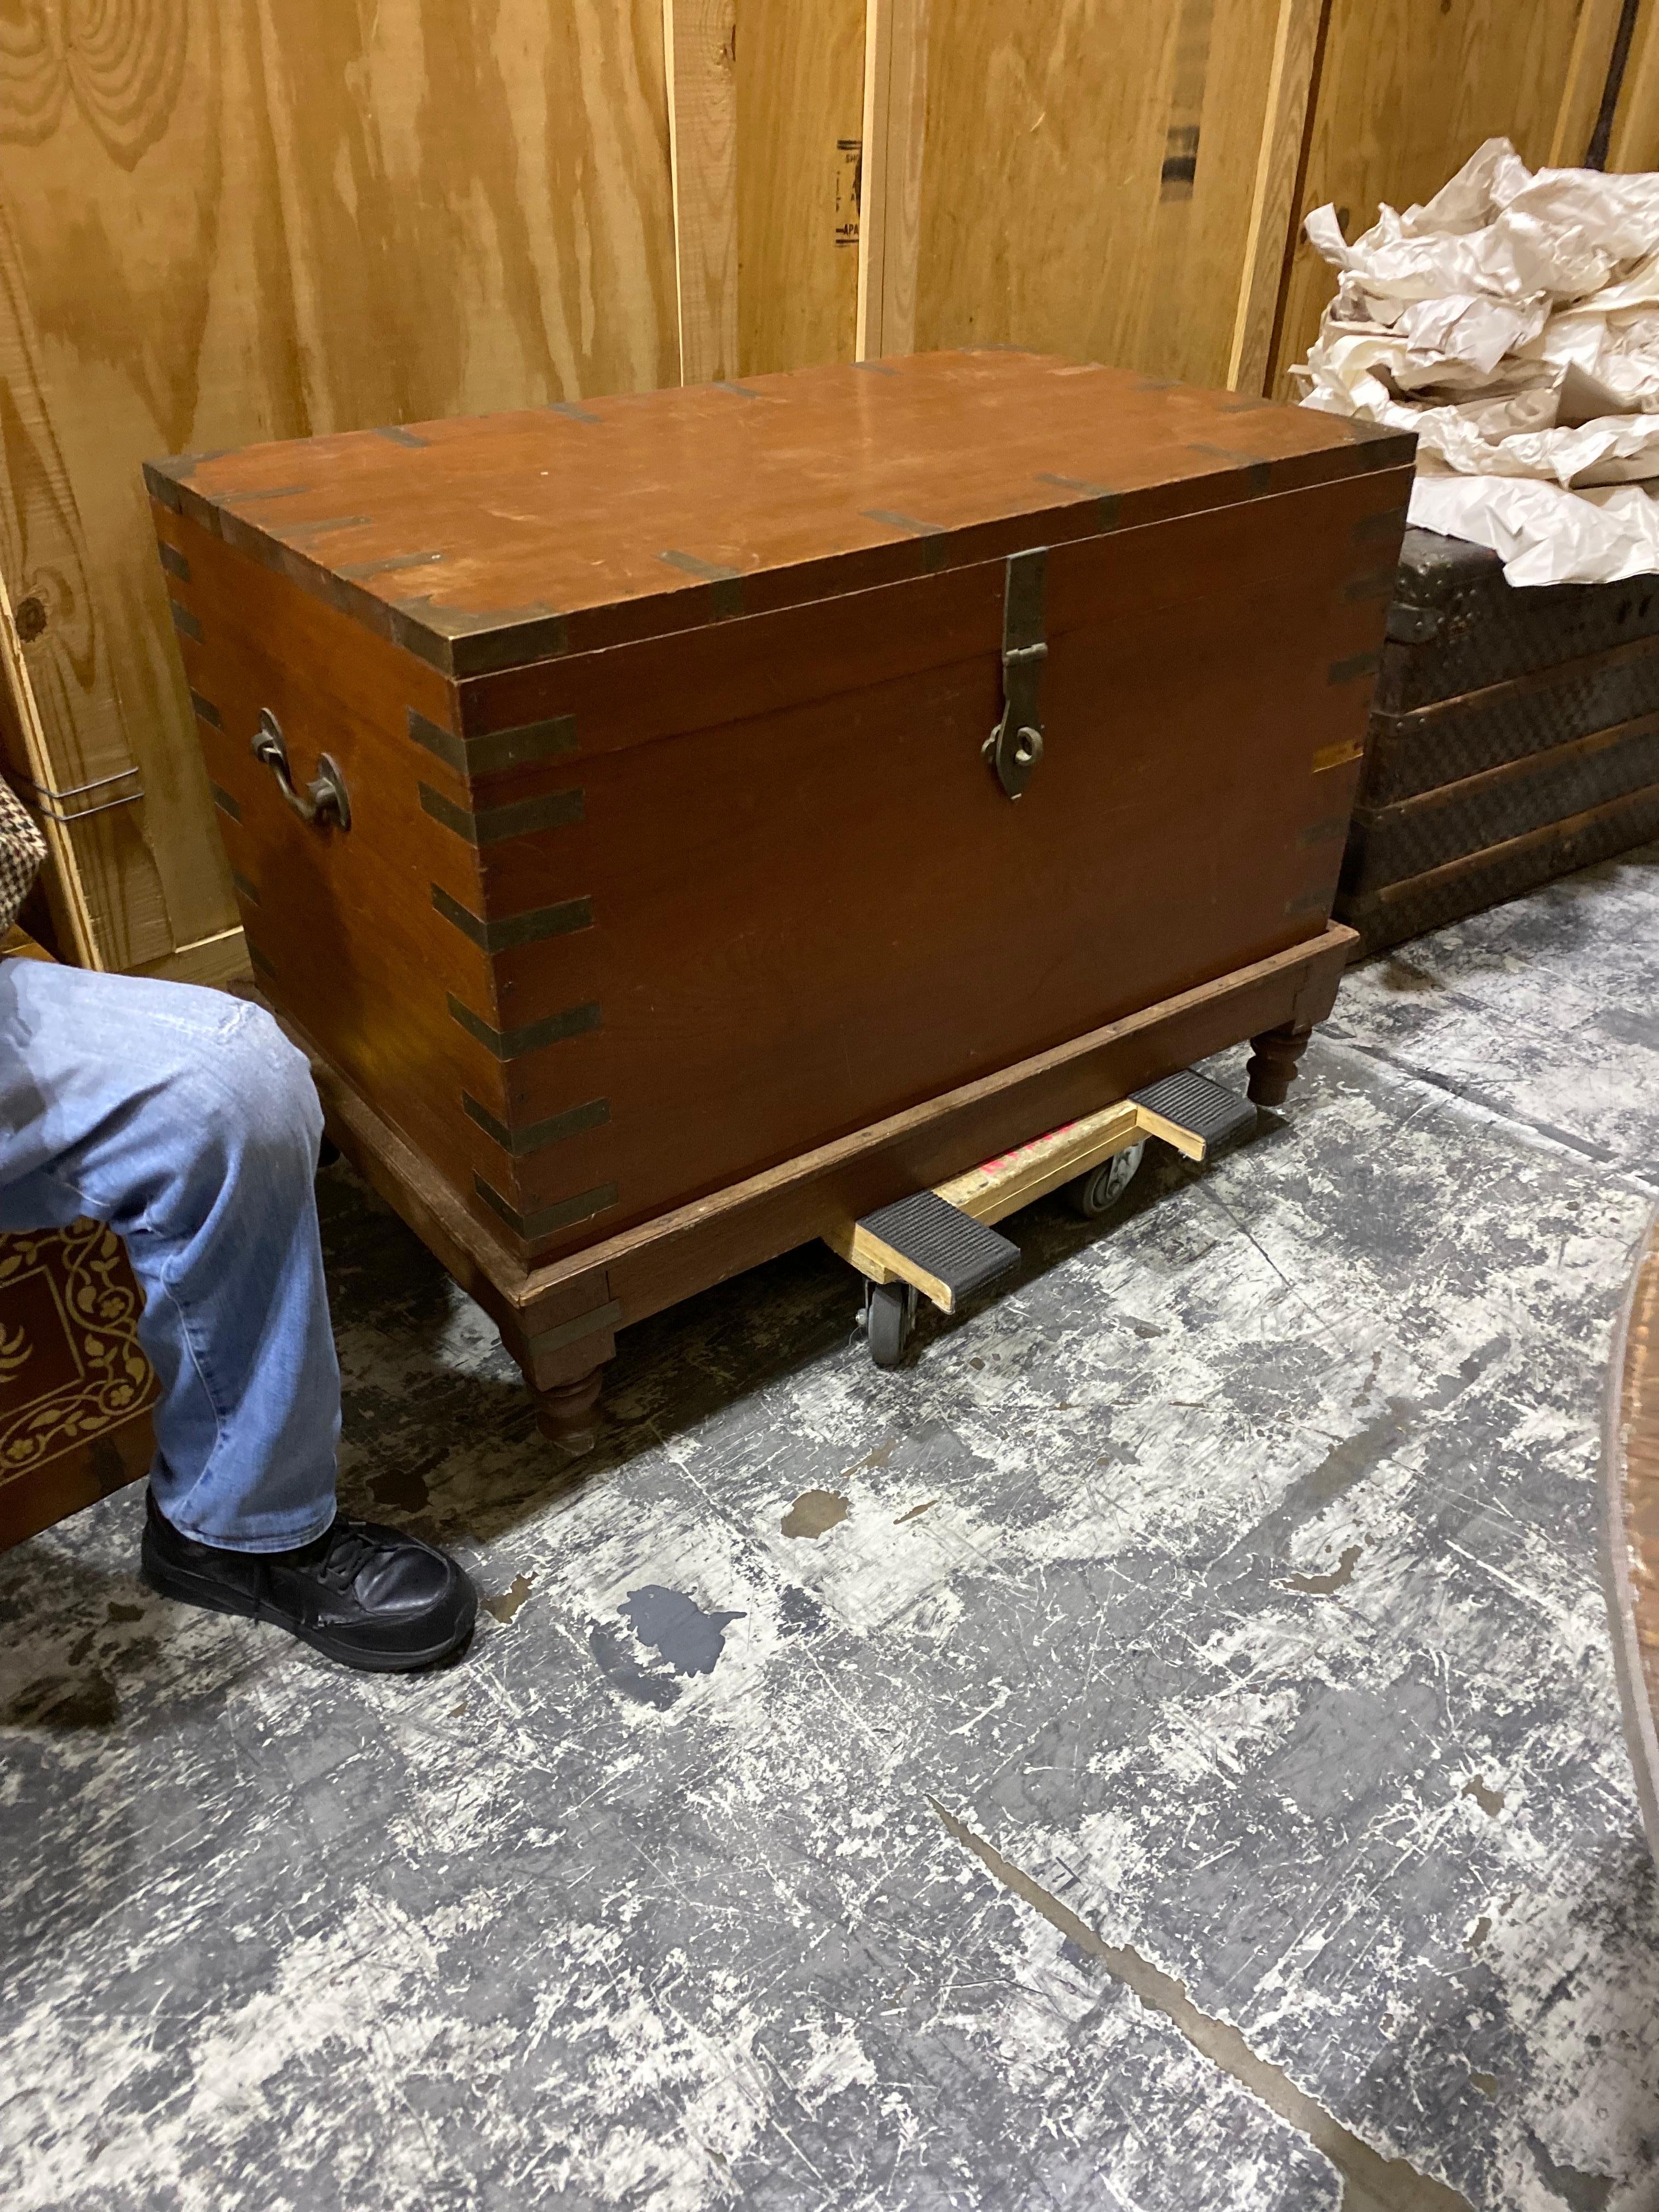 20th Century Large French Simple wooden trunk/ blanket chest
A simple wooden rectangular box construction with brass strap hardware on edges on a turned leg wooden stand. A candle box on top right corner. Possibly for storing sacred items like